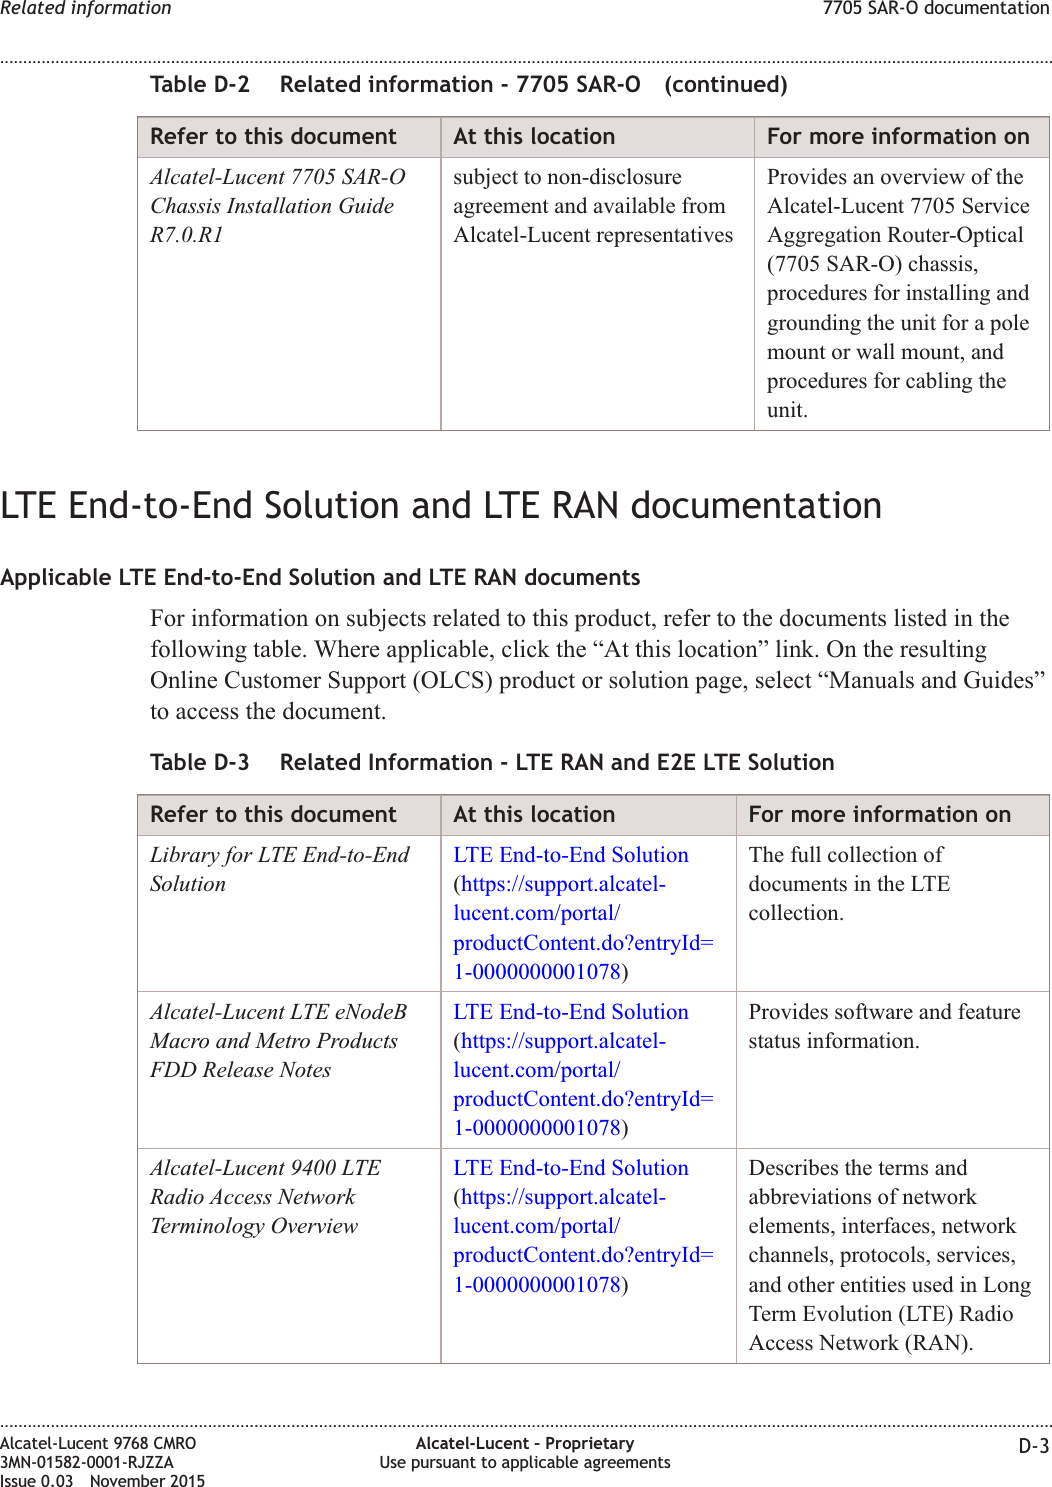 Table D-2 Related information - 7705 SAR-O (continued)Refer to this document At this location For more information onAlcatel-Lucent 7705 SAR-OChassis Installation GuideR7.0.R1subject to non-disclosureagreement and available fromAlcatel-Lucent representativesProvides an overview of theAlcatel-Lucent 7705 ServiceAggregation Router-Optical(7705 SAR-O) chassis,procedures for installing andgrounding the unit for a polemount or wall mount, andprocedures for cabling theunit.LTE End-to-End Solution and LTE RAN documentationApplicable LTE End-to-End Solution and LTE RAN documentsFor information on subjects related to this product, refer to the documents listed in thefollowing table. Where applicable, click the “At this location” link. On the resultingOnline Customer Support (OLCS) product or solution page, select “Manuals and Guides”to access the document.Table D-3 Related Information - LTE RAN and E2E LTE SolutionRefer to this document At this location For more information onLibrary for LTE End-to-EndSolutionLTE End-to-End Solution(https://support.alcatel-lucent.com/portal/productContent.do?entryId=1-0000000001078)The full collection ofdocuments in the LTEcollection.Alcatel-Lucent LTE eNodeBMacro and Metro ProductsFDD Release NotesLTE End-to-End Solution(https://support.alcatel-lucent.com/portal/productContent.do?entryId=1-0000000001078)Provides software and featurestatus information.Alcatel-Lucent 9400 LTERadio Access NetworkTerminology OverviewLTE End-to-End Solution(https://support.alcatel-lucent.com/portal/productContent.do?entryId=1-0000000001078)Describes the terms andabbreviations of networkelements, interfaces, networkchannels, protocols, services,and other entities used in LongTerm Evolution (LTE) RadioAccess Network (RAN).Related information 7705 SAR-O documentation........................................................................................................................................................................................................................................................................................................................................................................................................................................................................Alcatel-Lucent 9768 CMRO3MN-01582-0001-RJZZAIssue 0.03 November 2015Alcatel-Lucent – ProprietaryUse pursuant to applicable agreements D-3DRAFTDRAFT